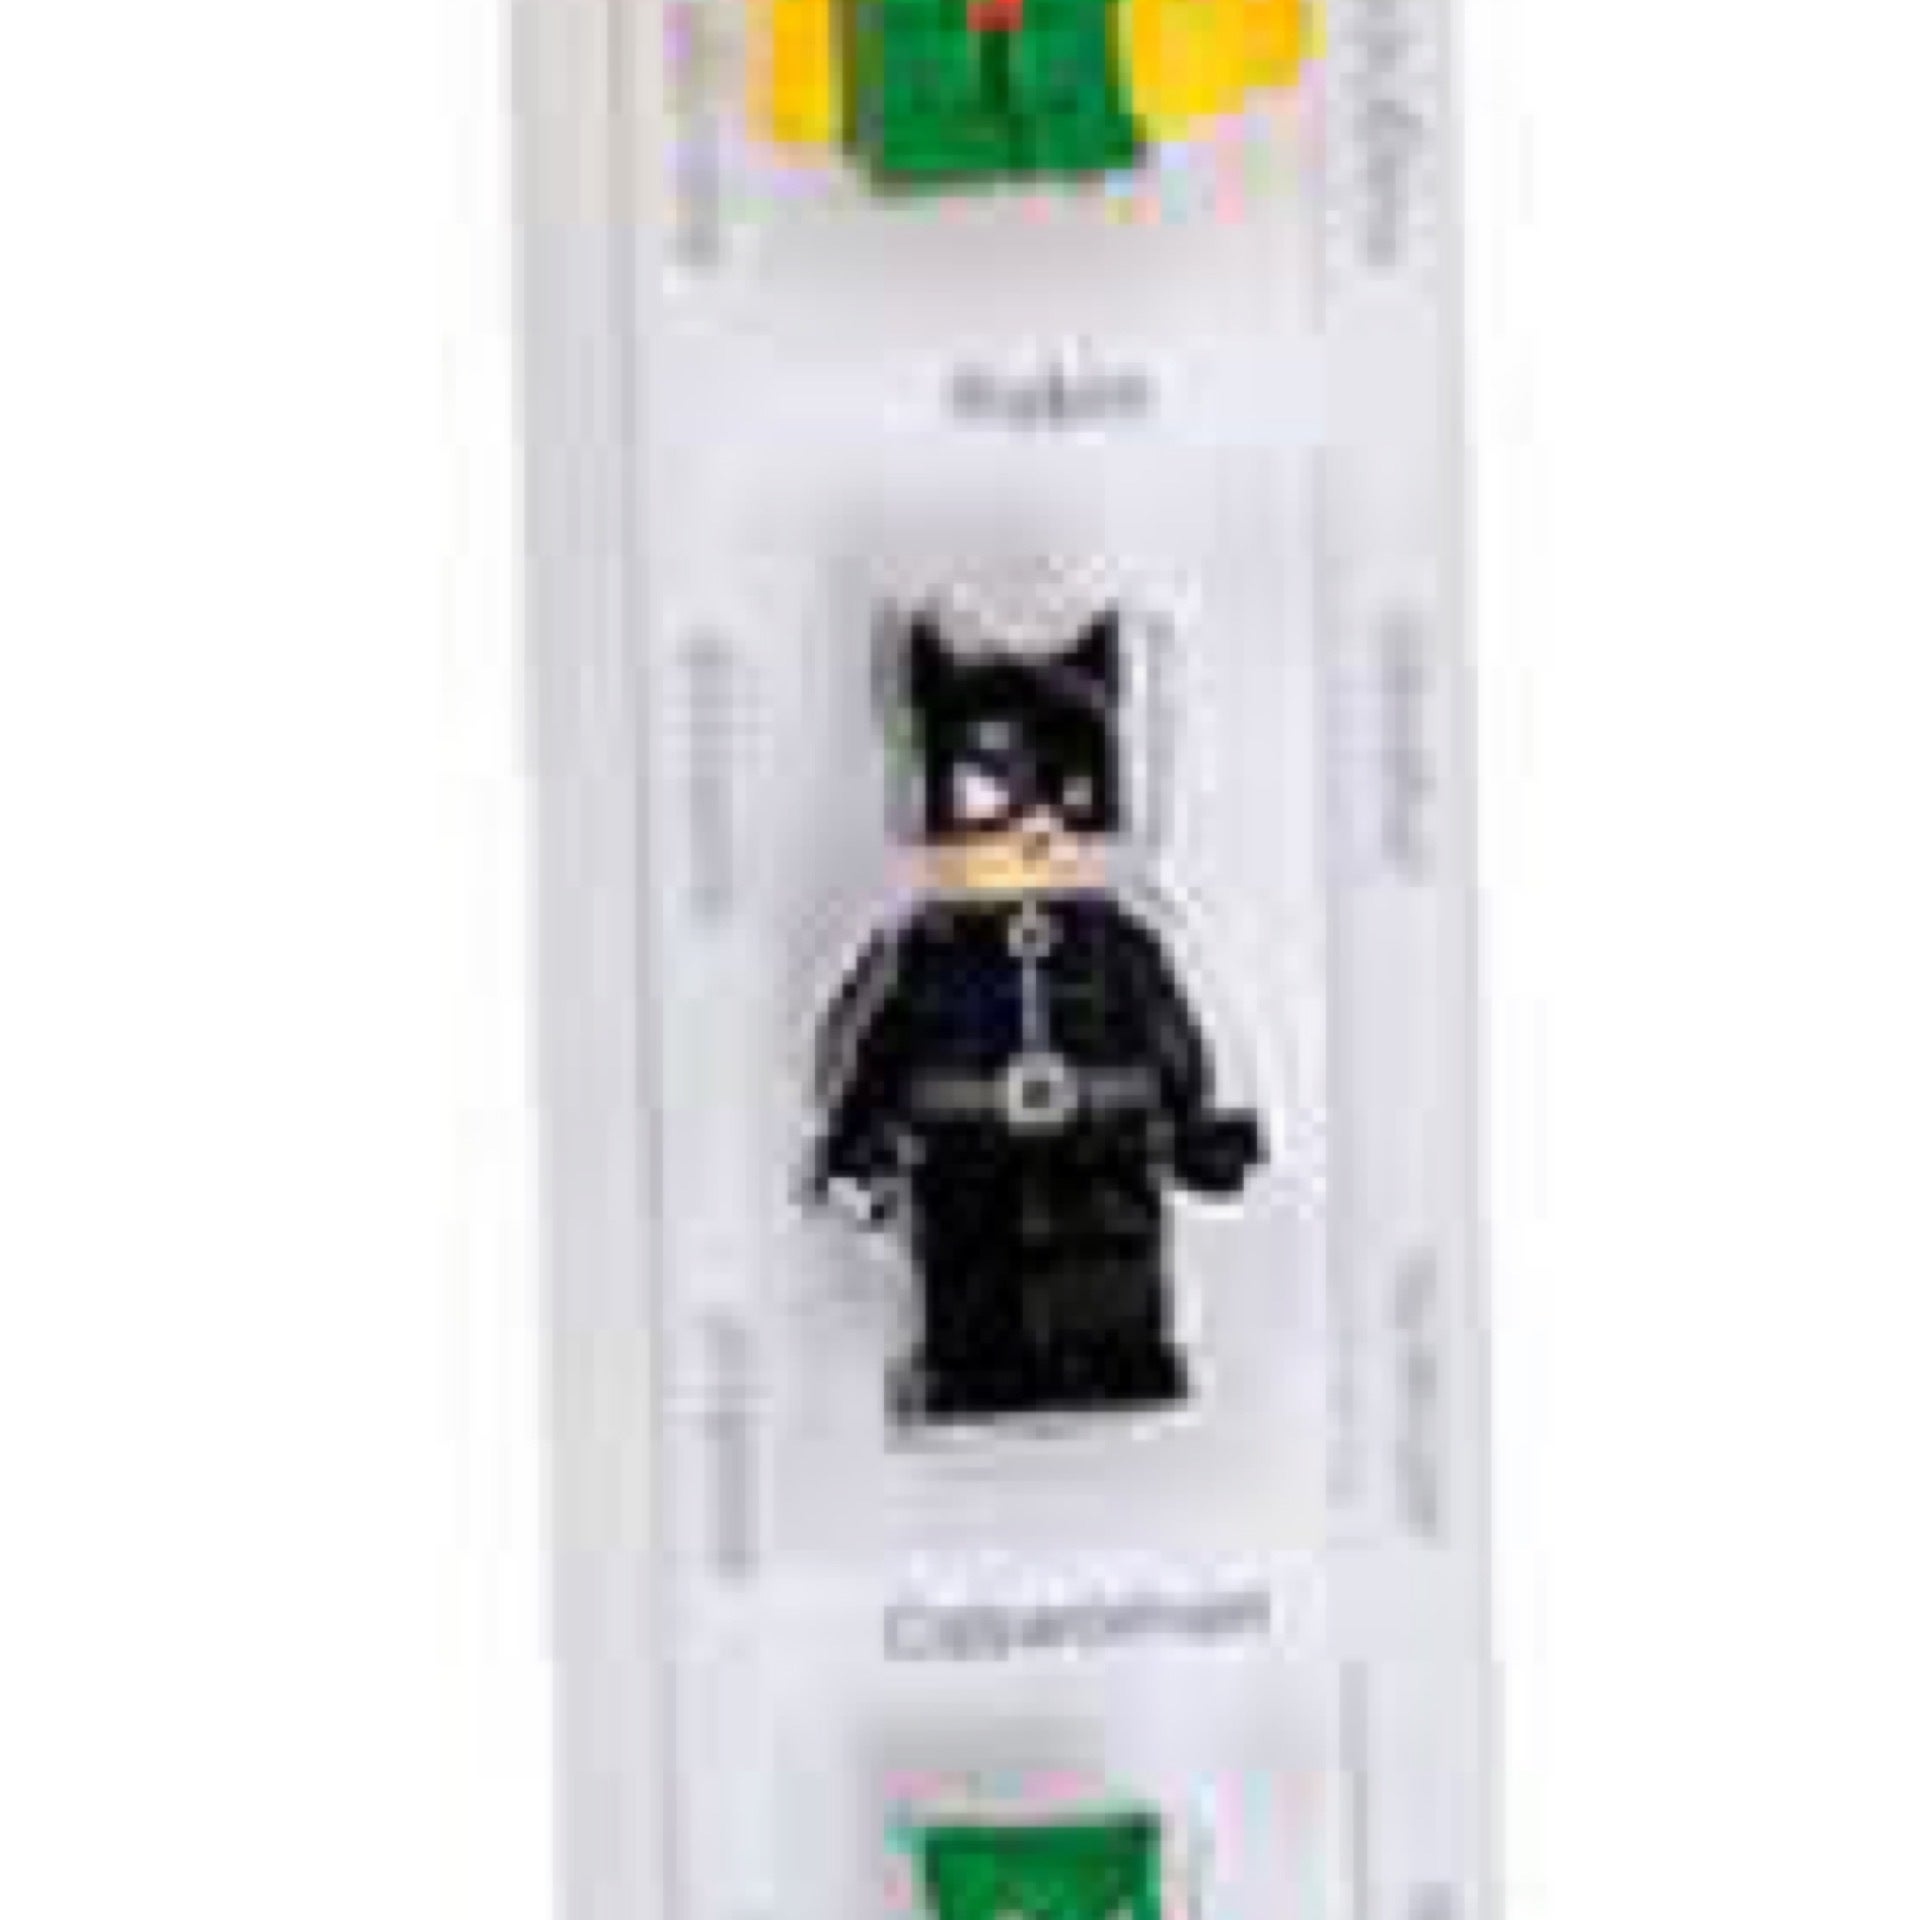 LEGO Catwoman Action Figures